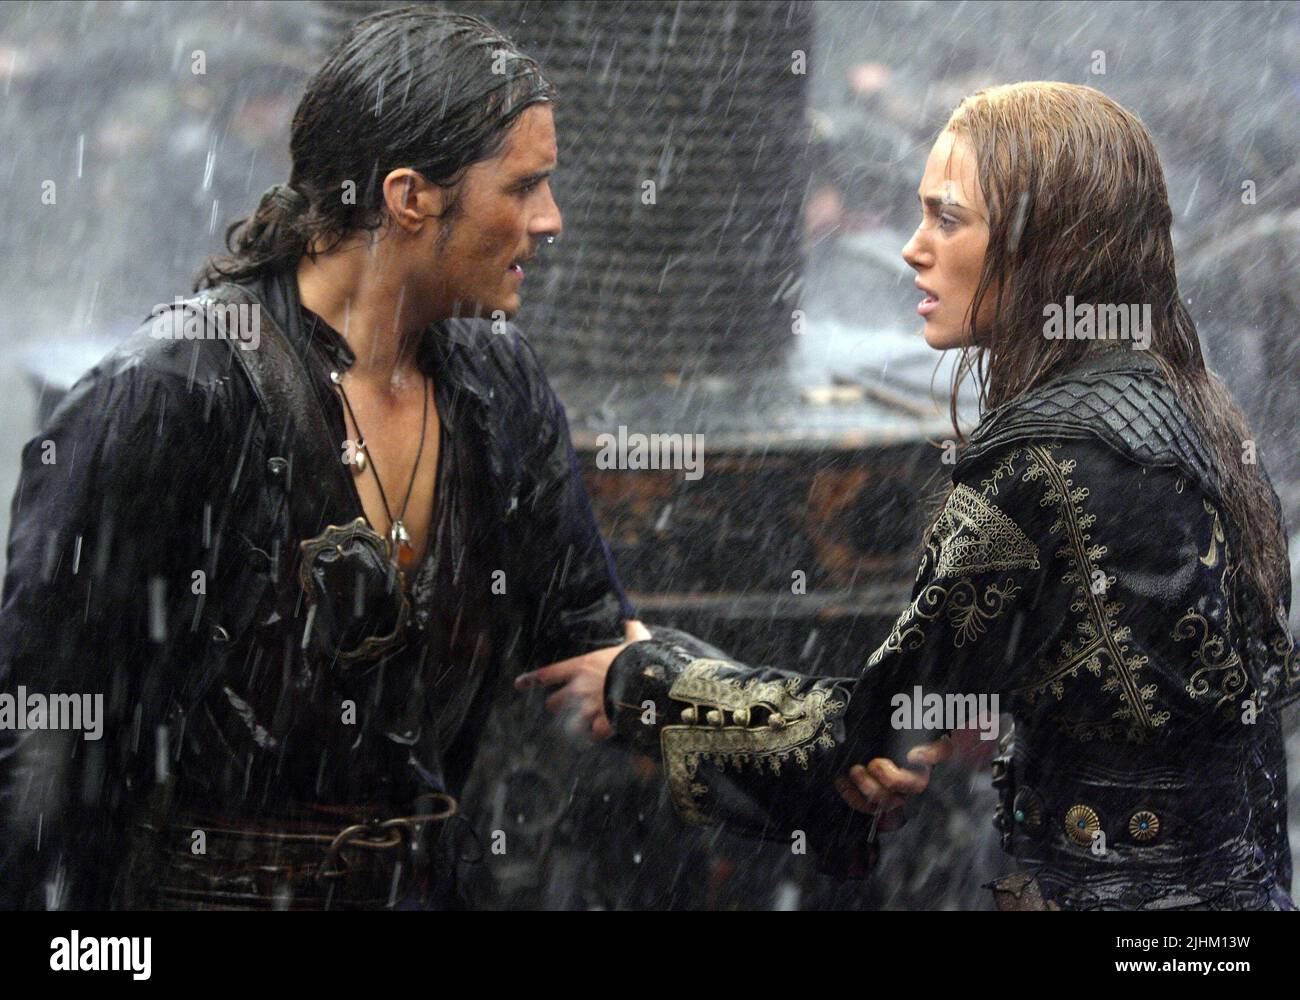 ORLANDO BLOOM, KEIRA KNIGHTLEY, PIRATES OF THE CARIBBEAN: AT WORLD'S END, 2007 Stock Photo